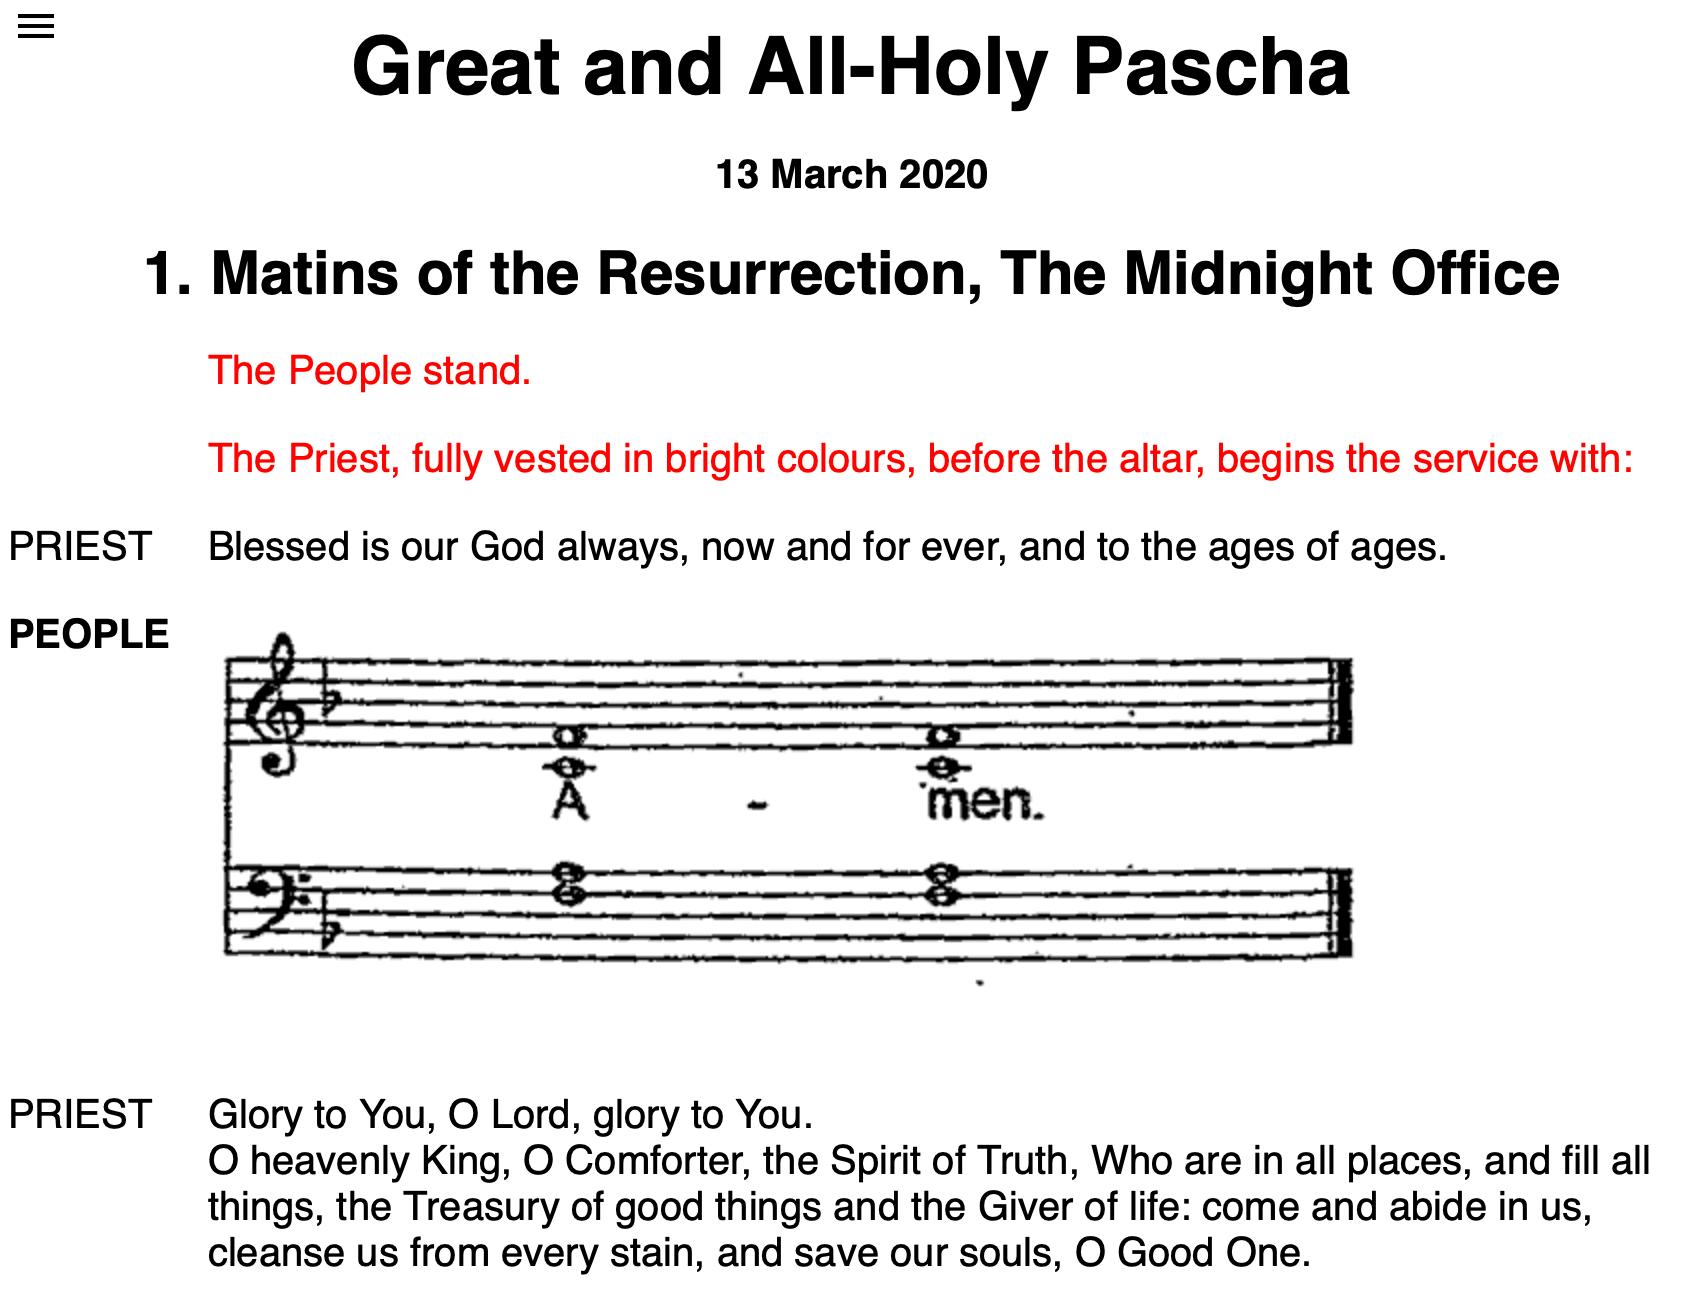 The Liturgy published online by The Good Shepherd